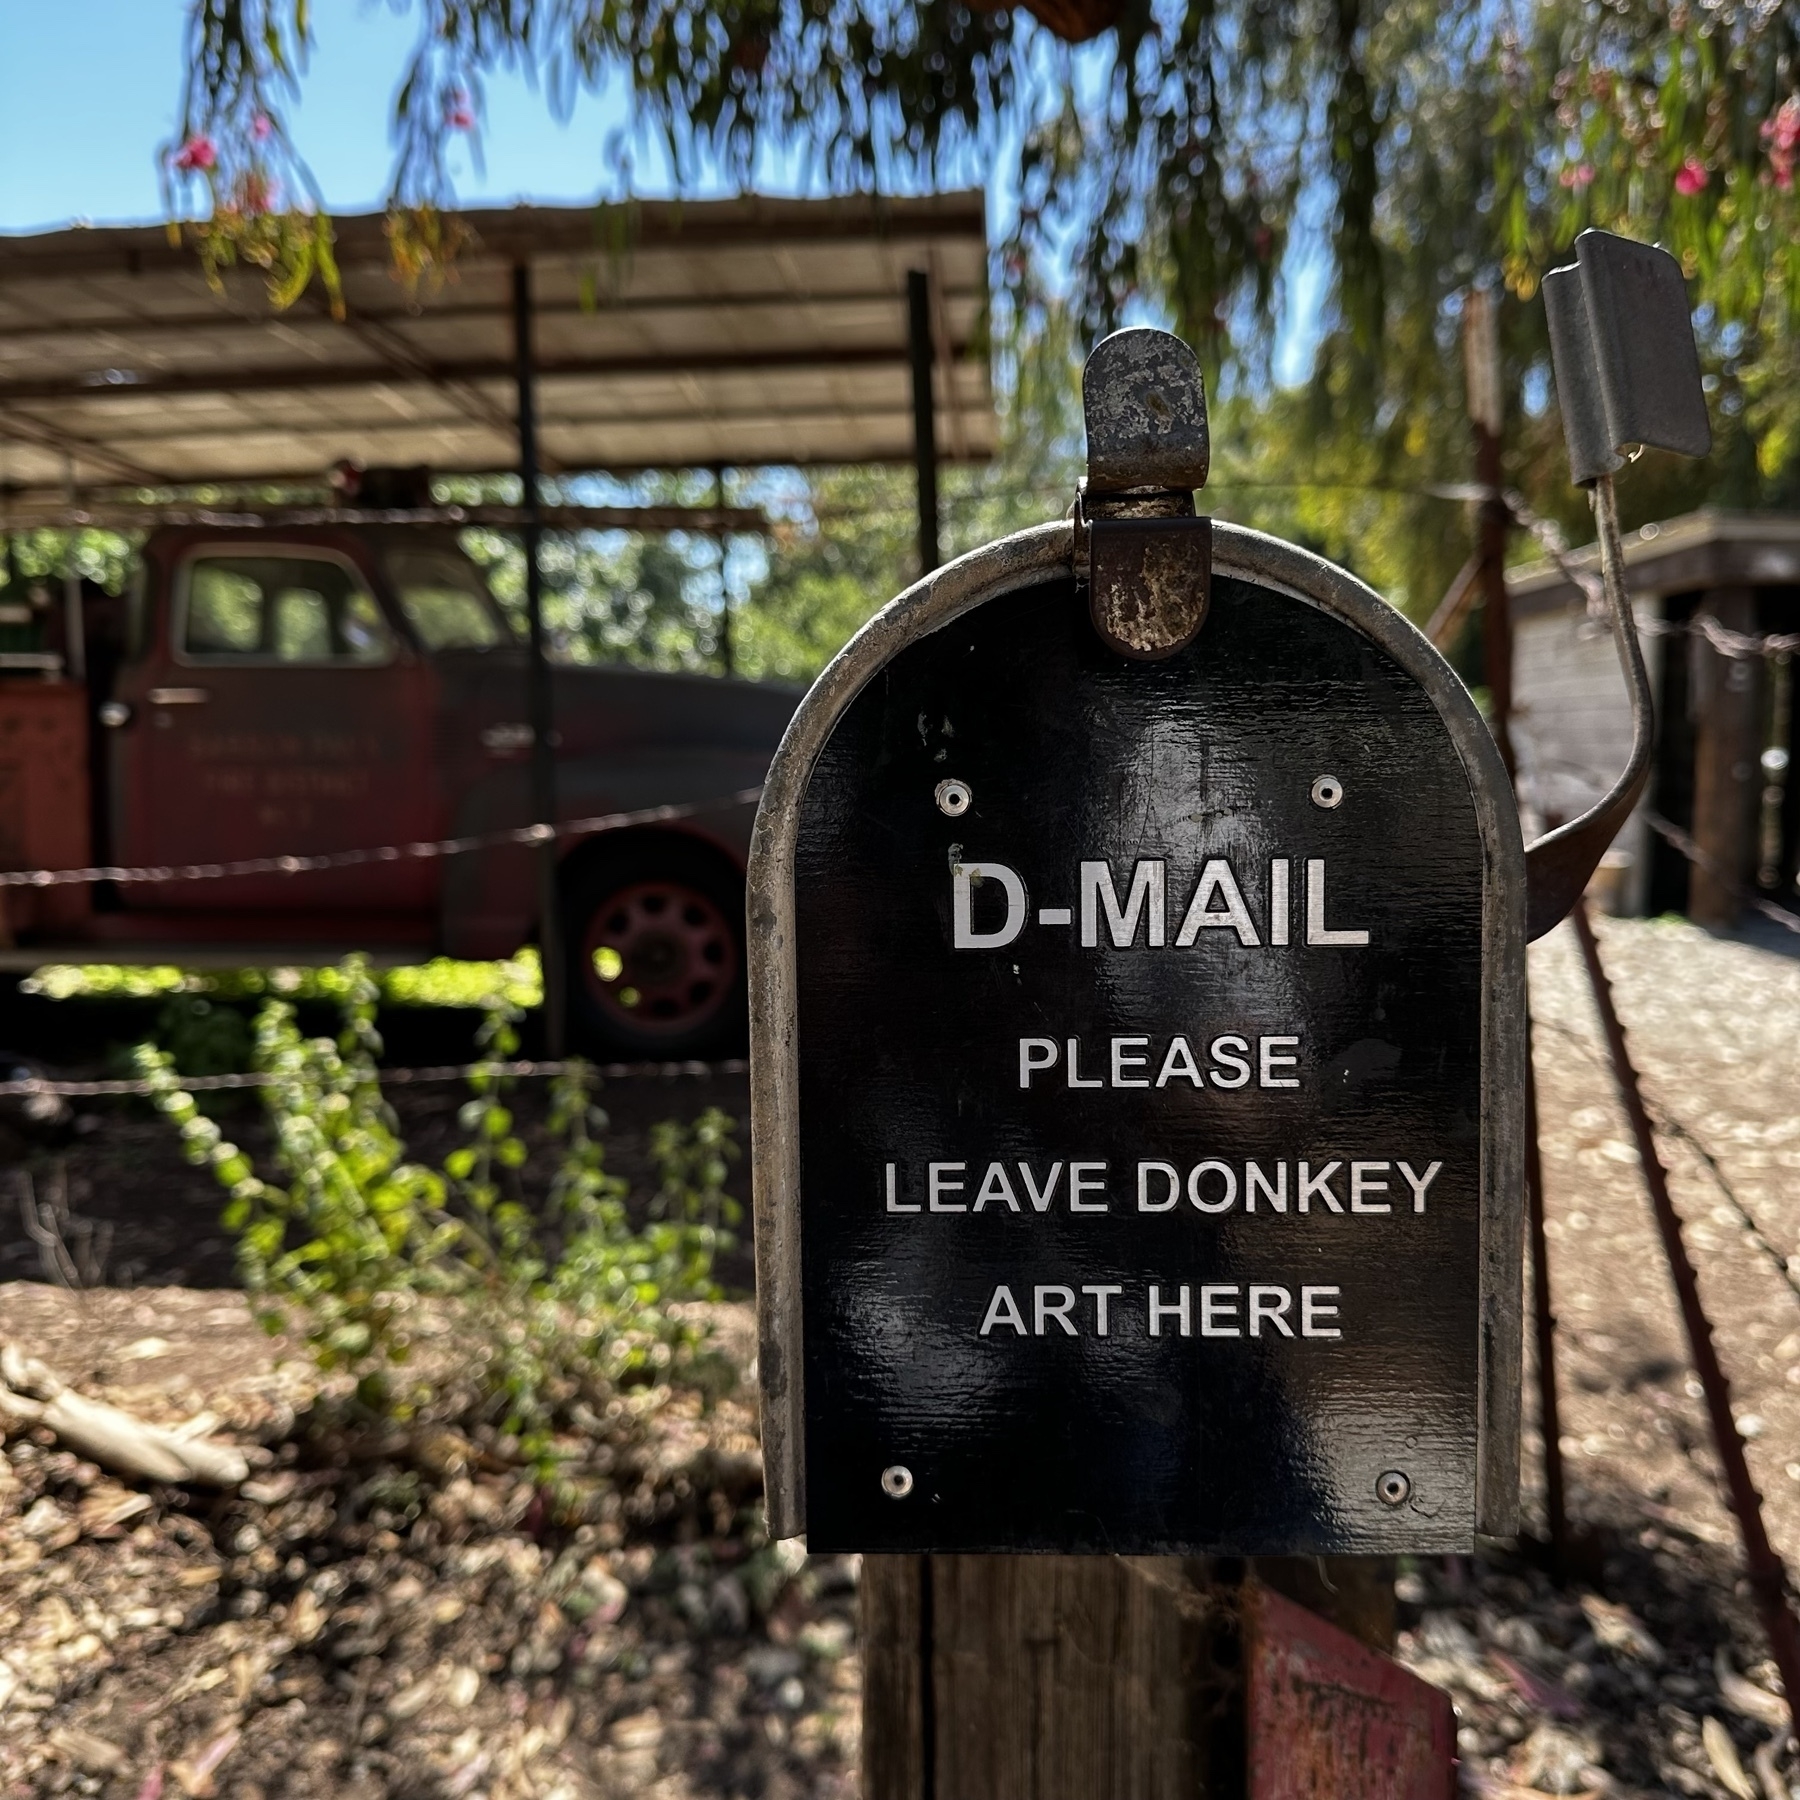 A mailbox at a petting zoo that says D-Mail Please Leave Donkey Art Here